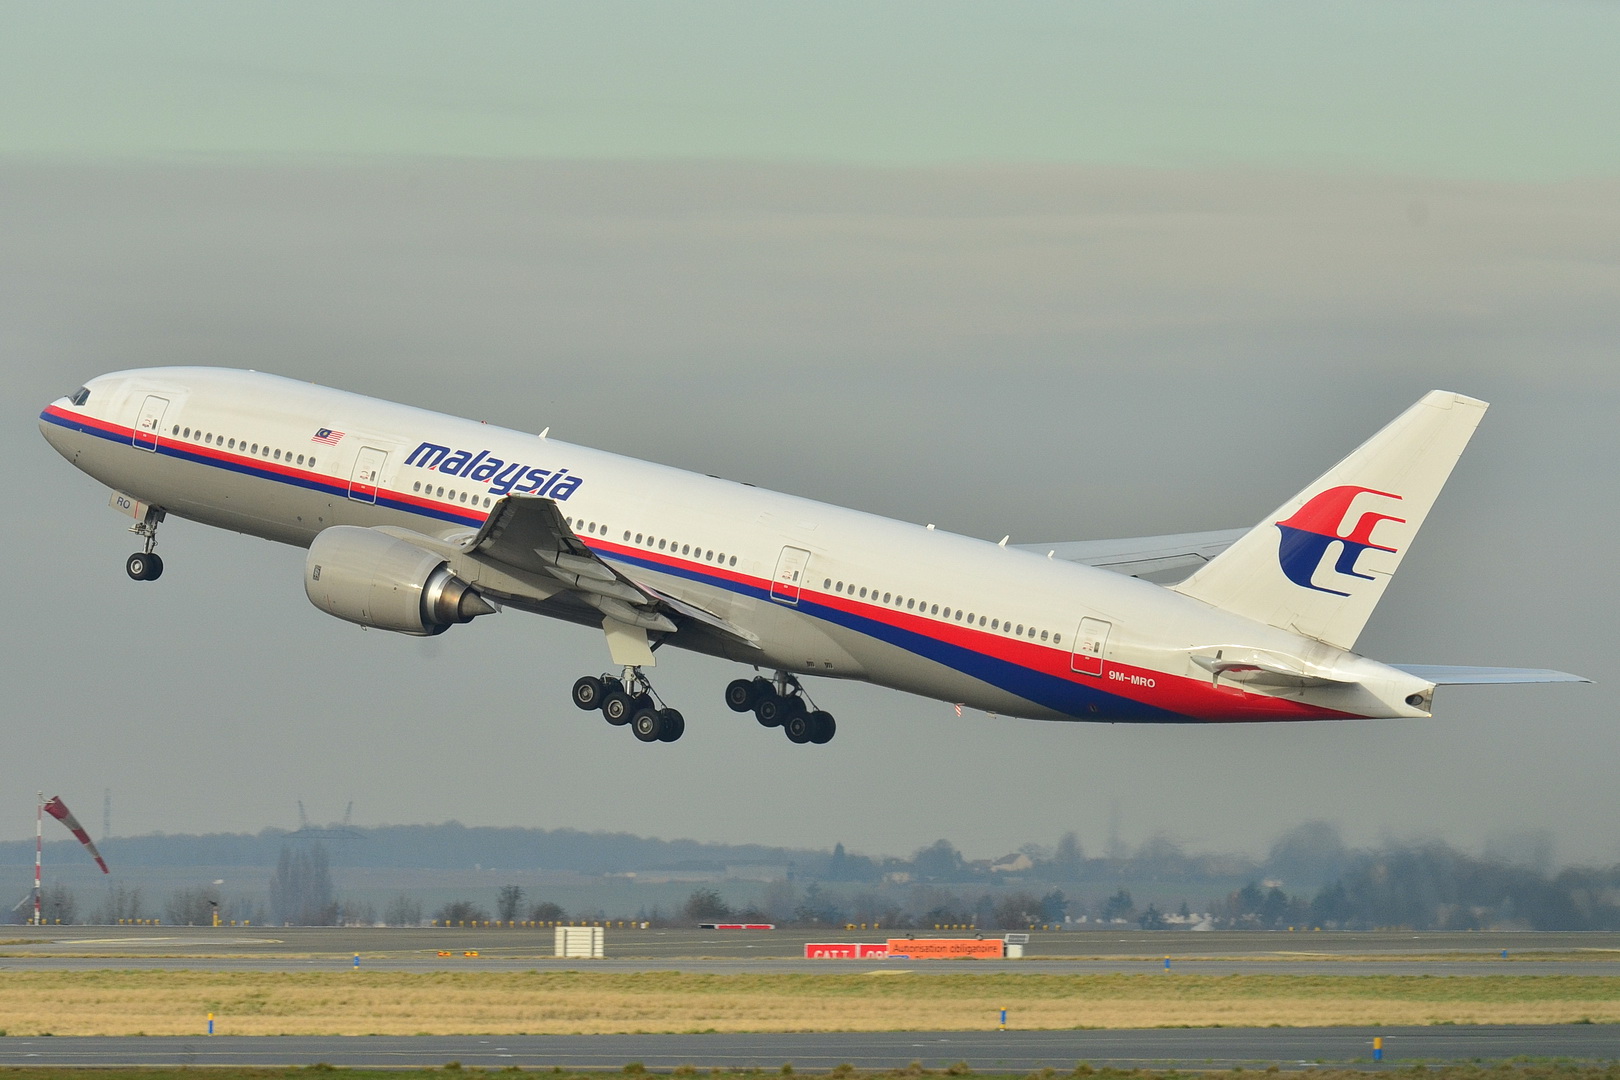 BREAKING: Malaysia Airlines plane shot down in Ukraine – VIDEO